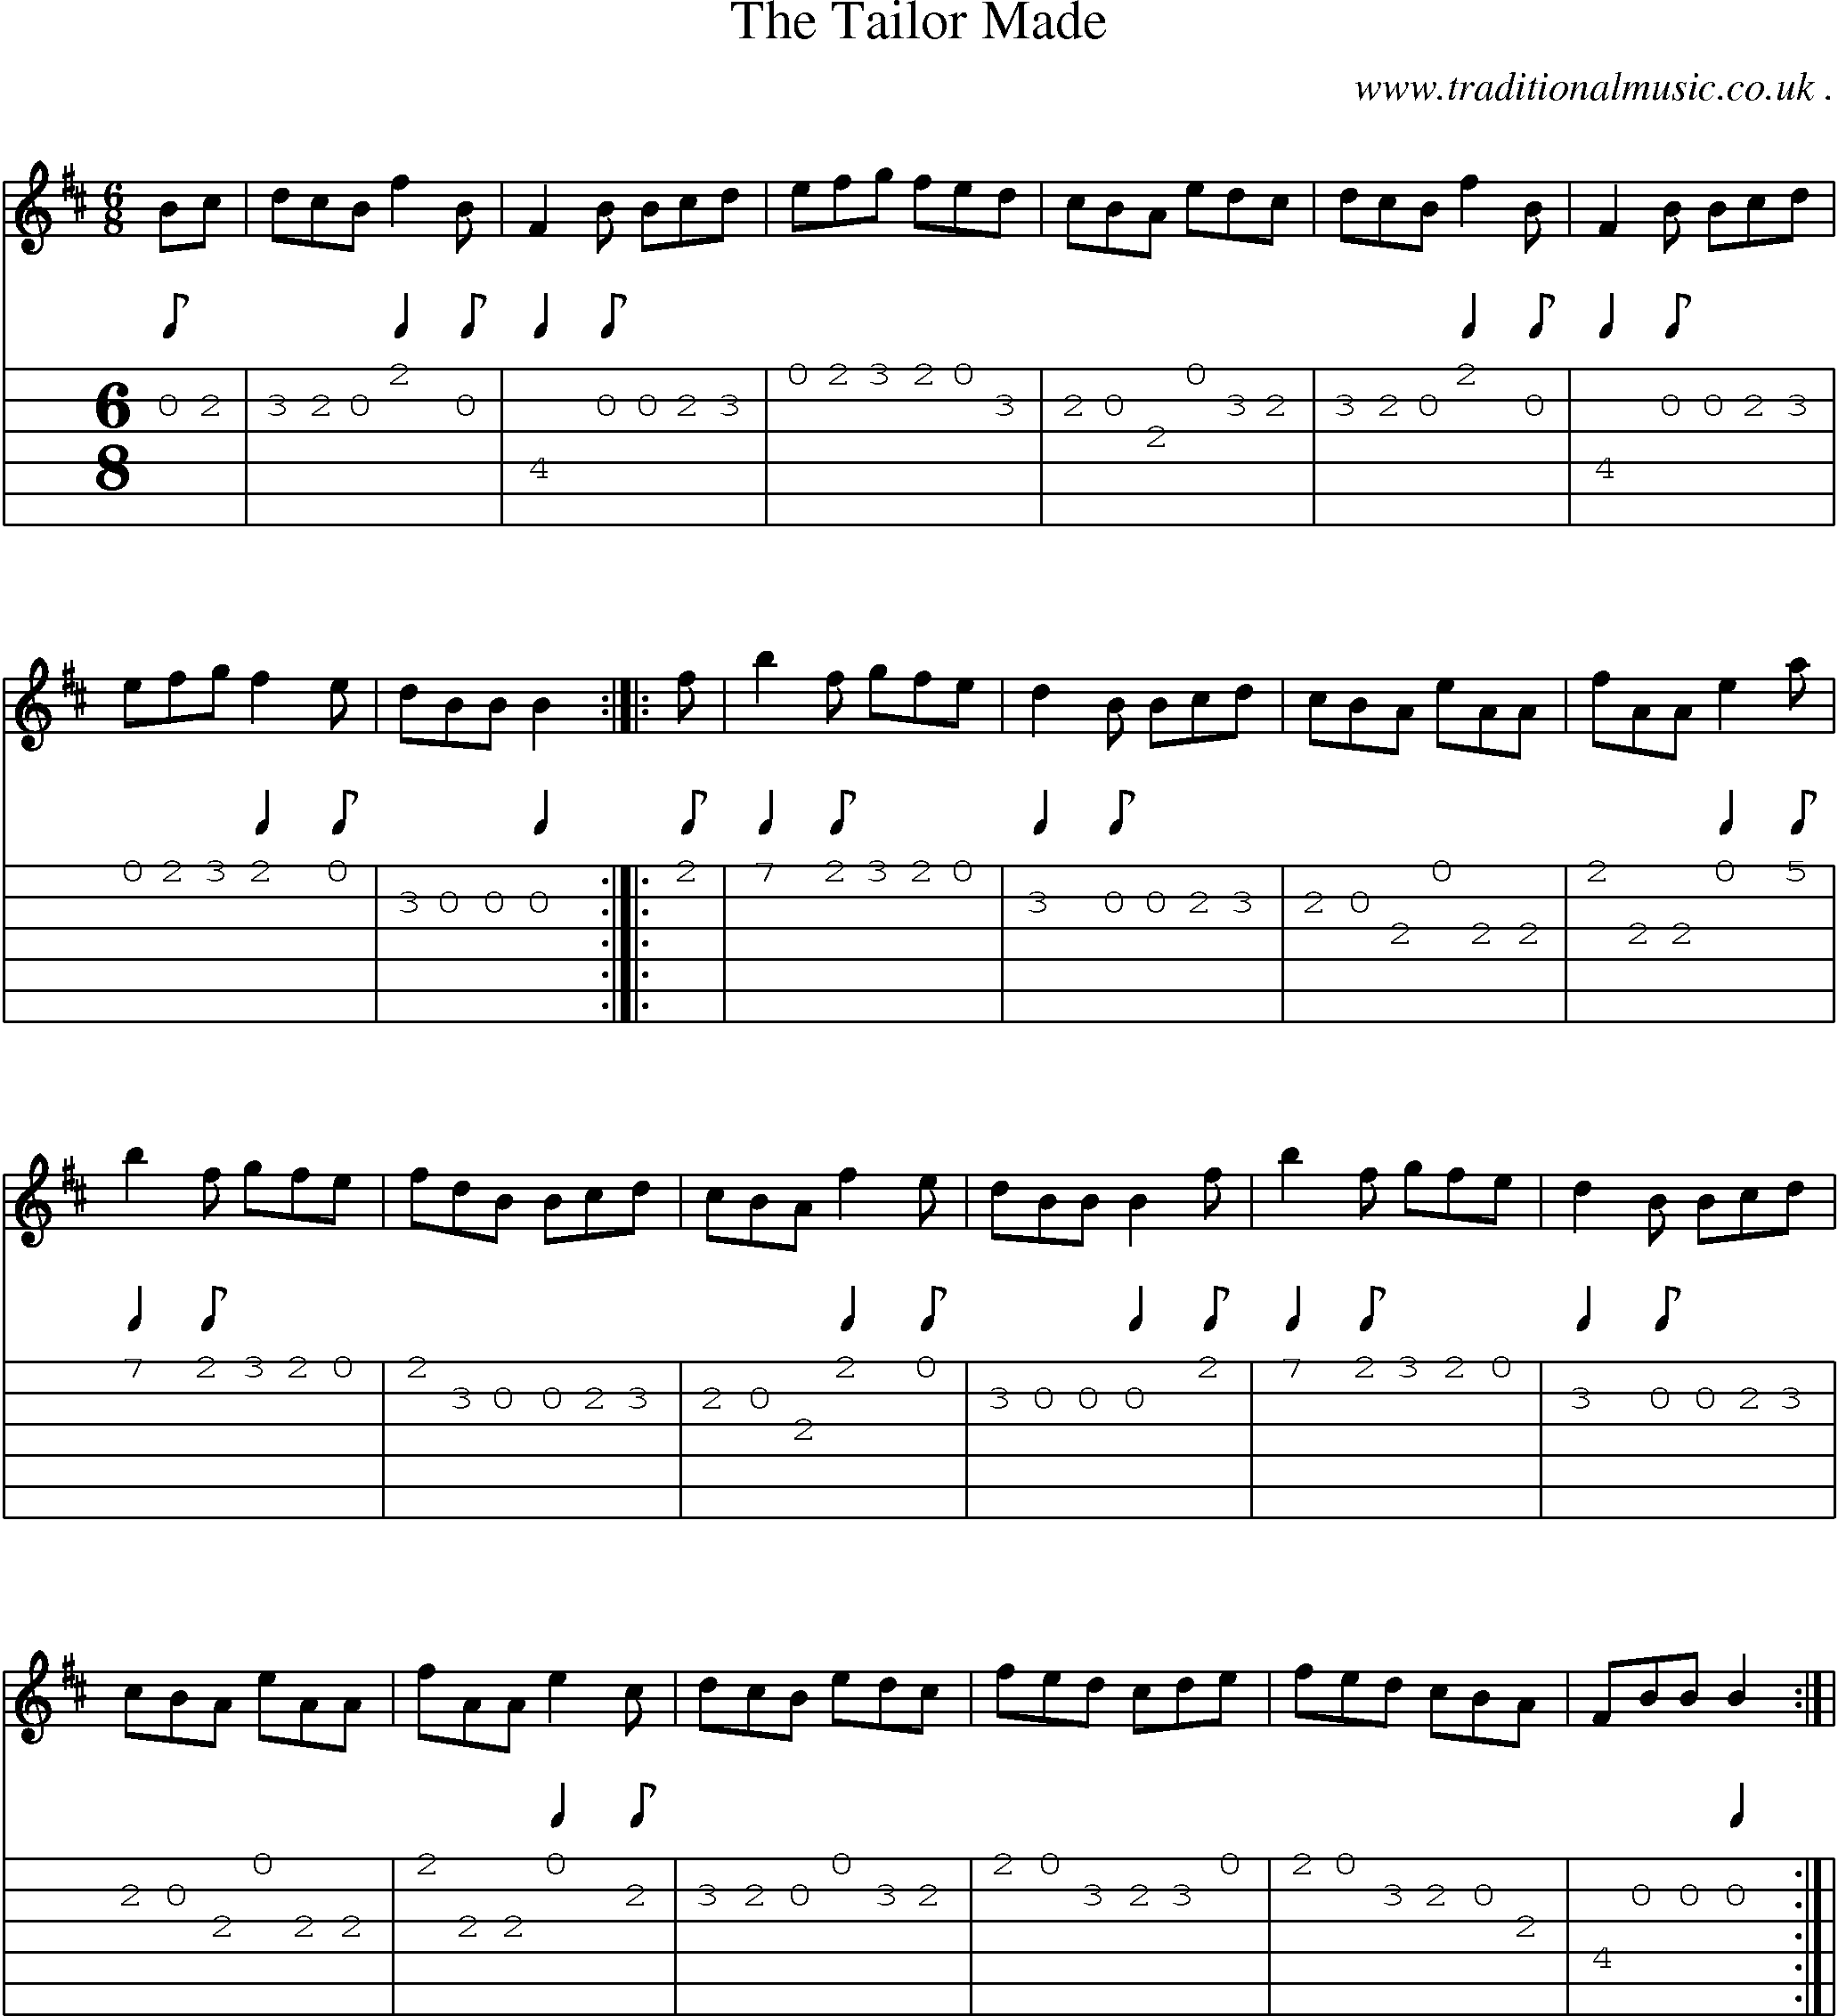 Sheet-Music and Guitar Tabs for The Tailor Made